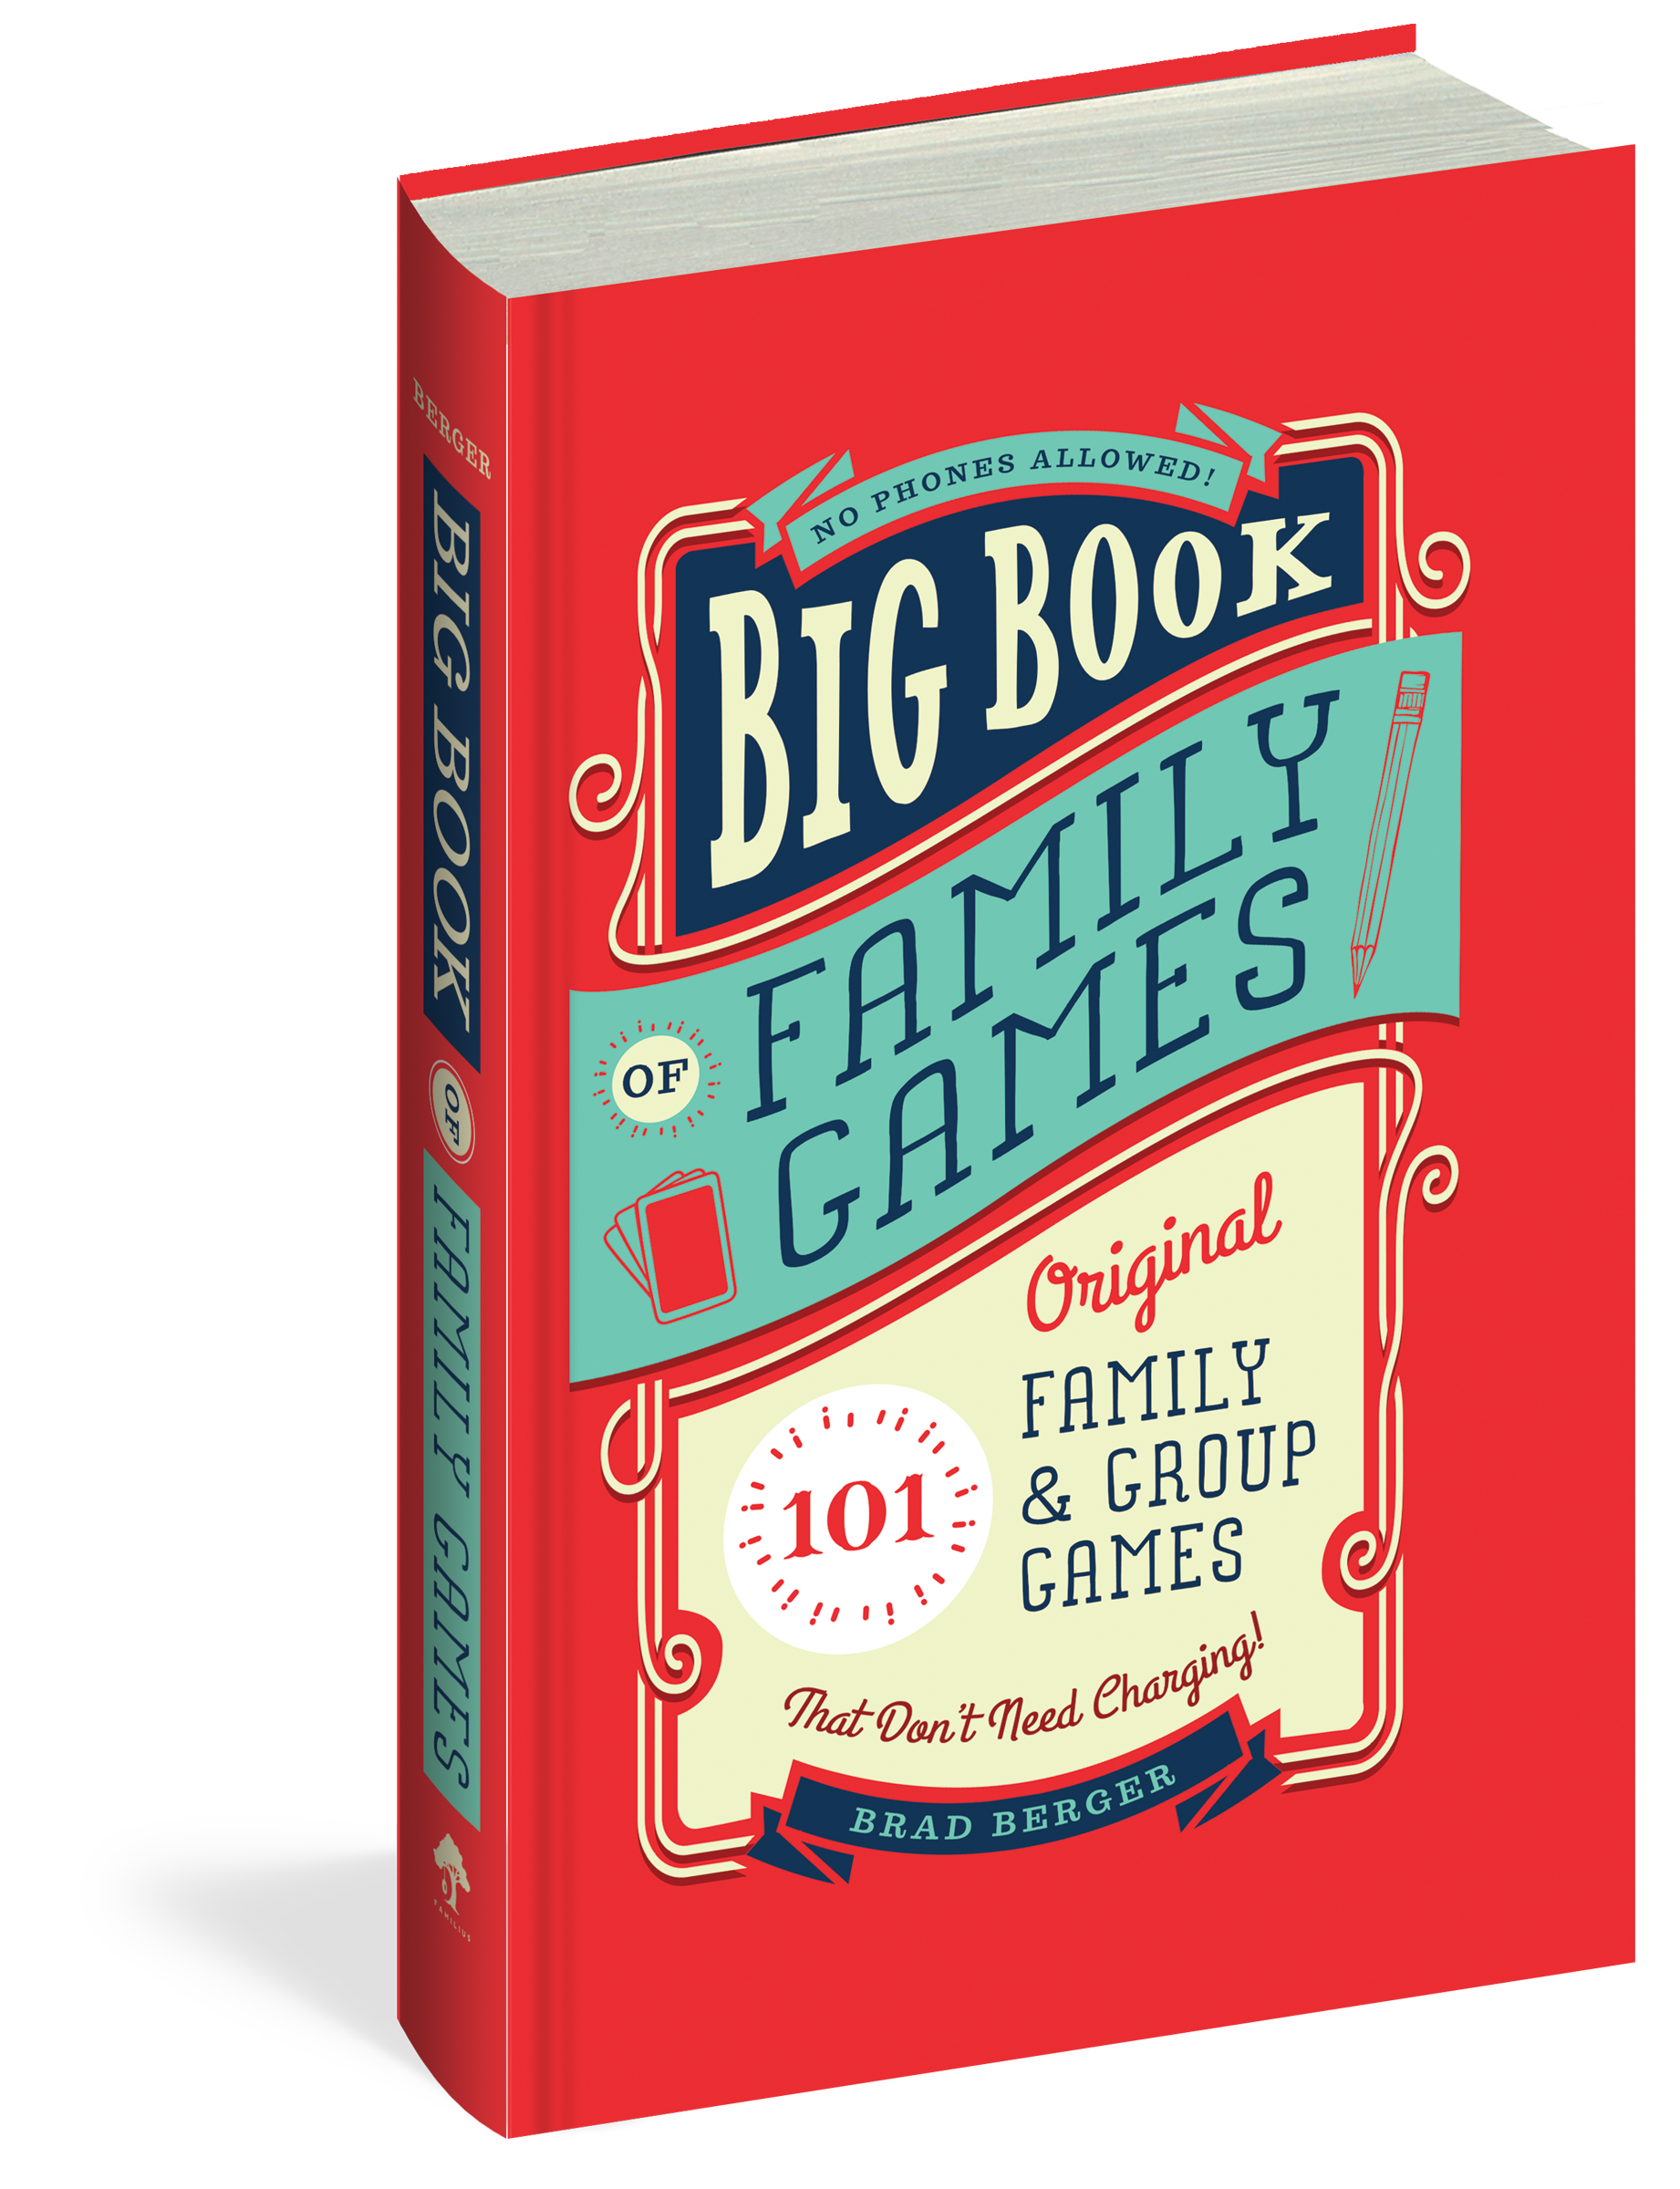 The cover of the book Big Book of Family Games.